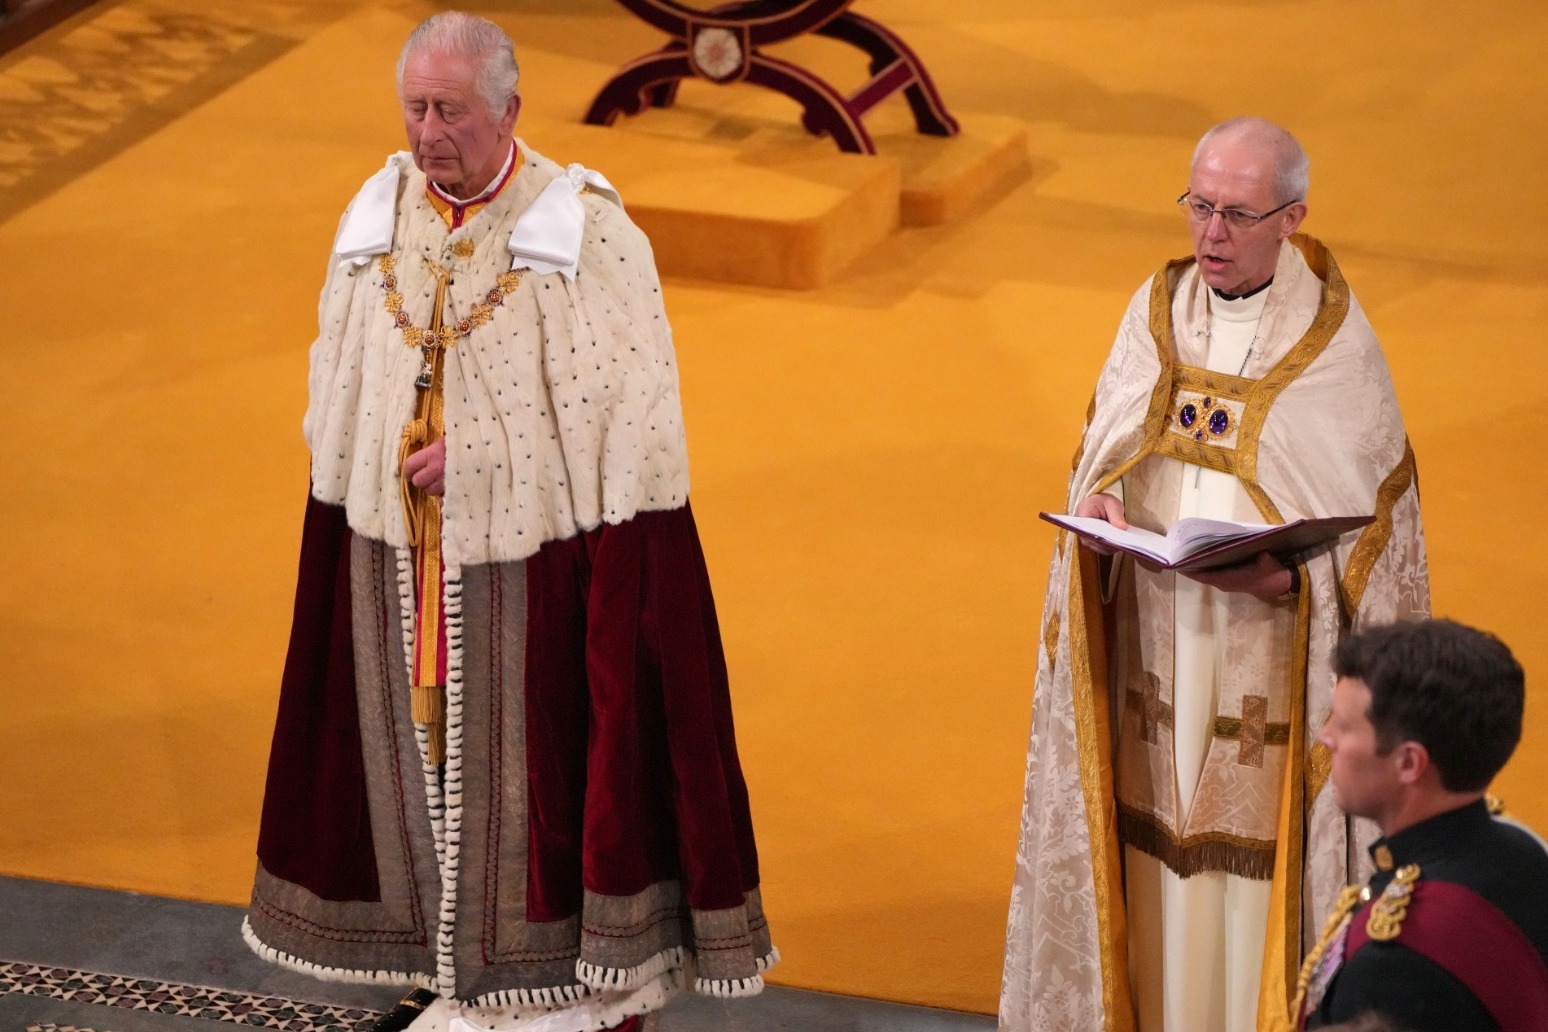 The Coronation of King Charles III is taking place 